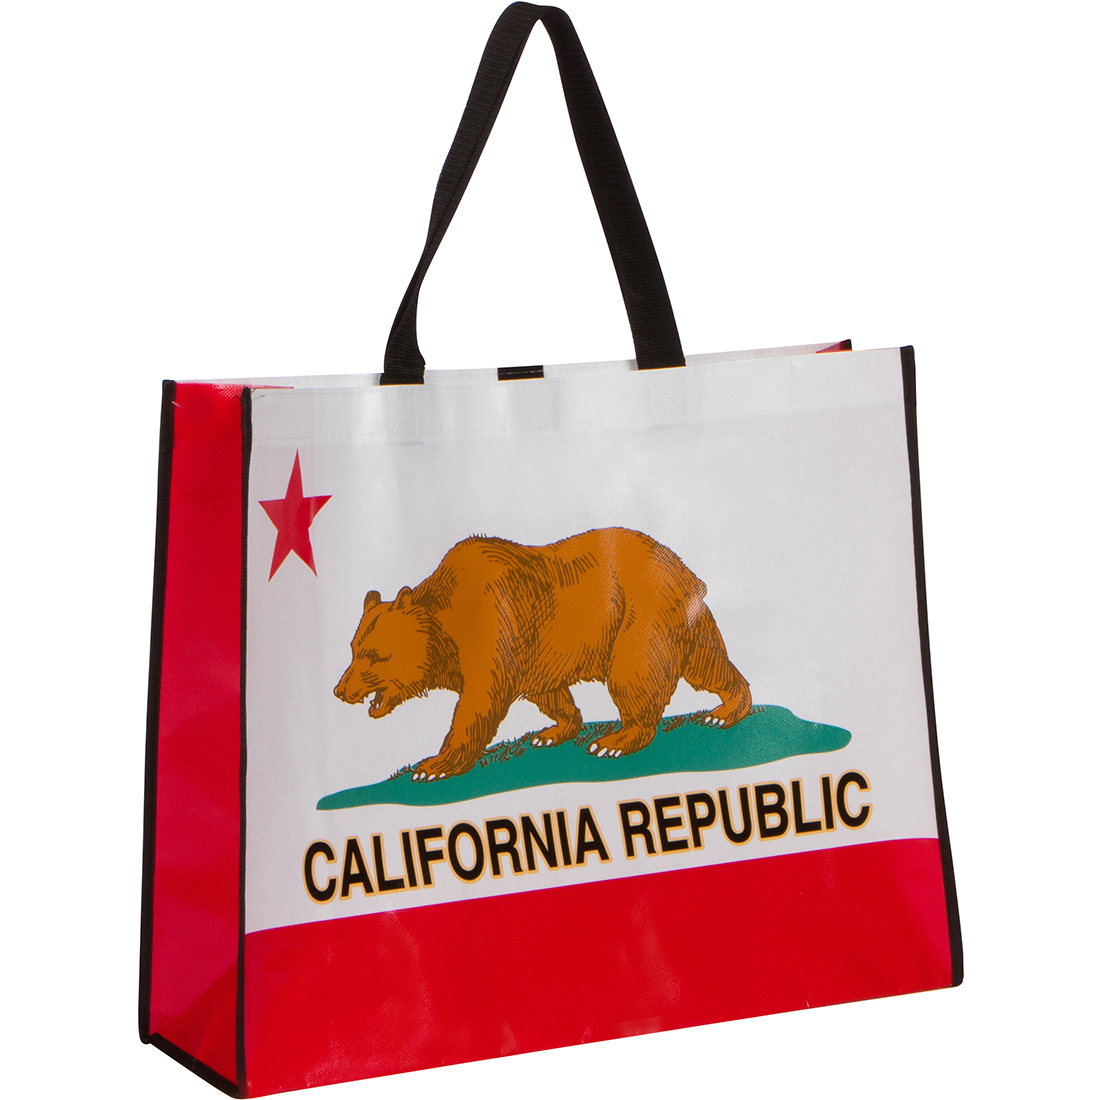 California Republic Recycled Shopping Tote Bag - Large Size